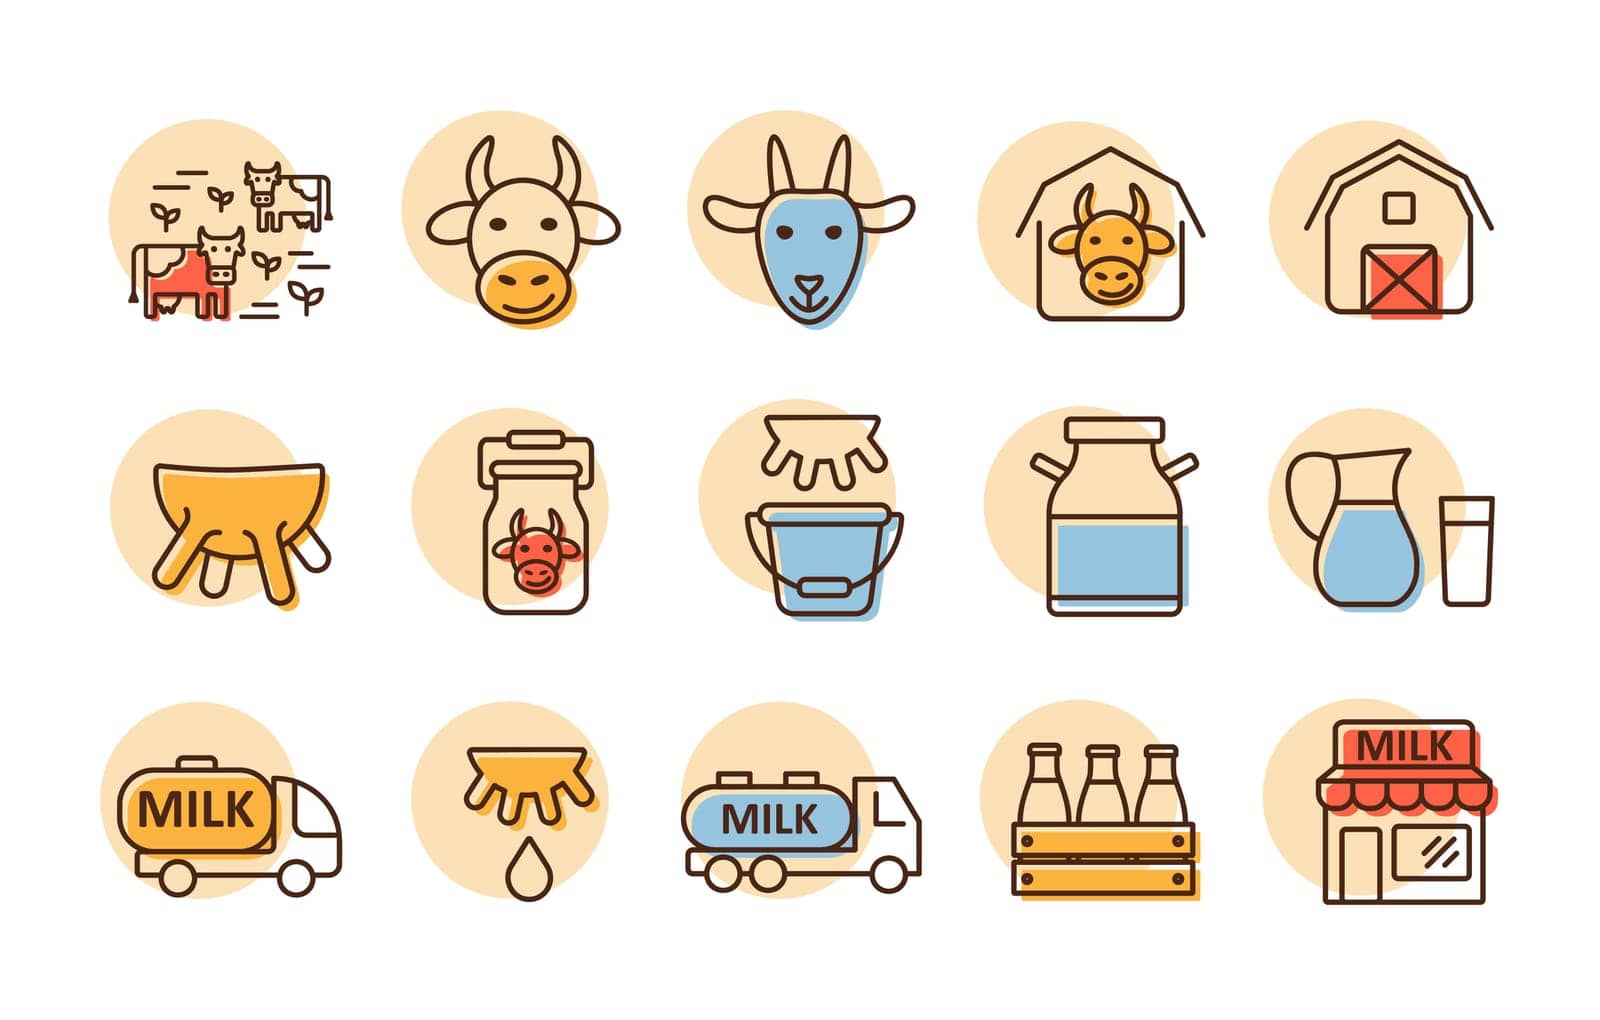 Milk vector icons set. Dairy products sign by nosik